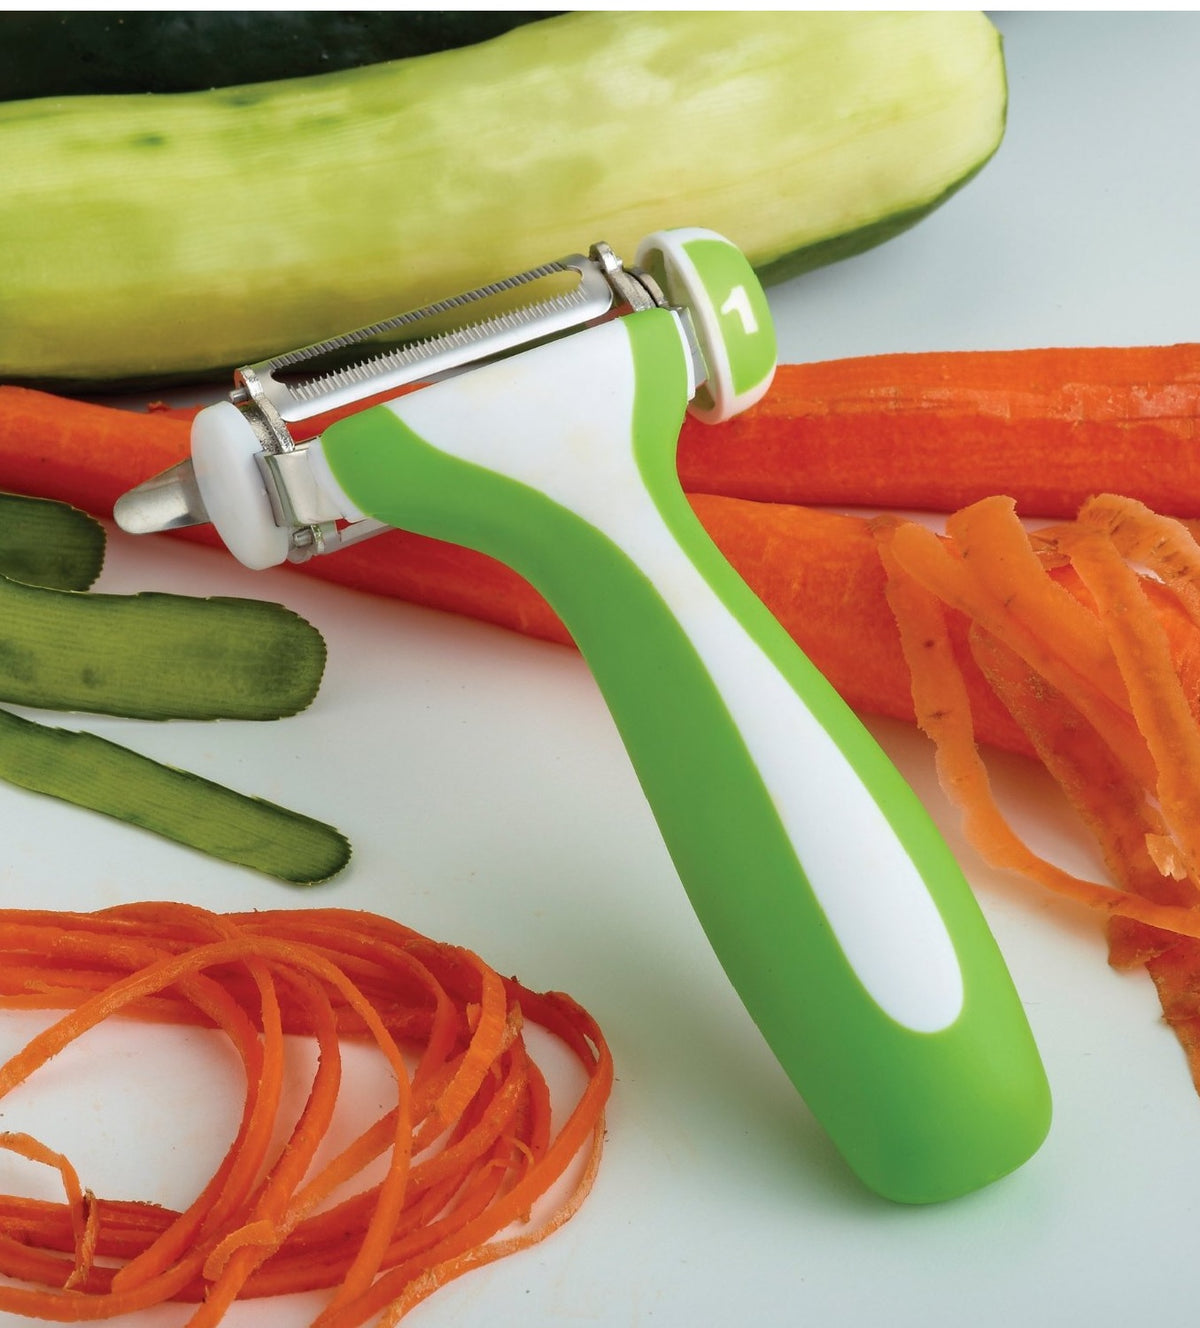 HIC 93214 The World’s Greatest 3-in-1 Rotational Tri-Blade Peeler